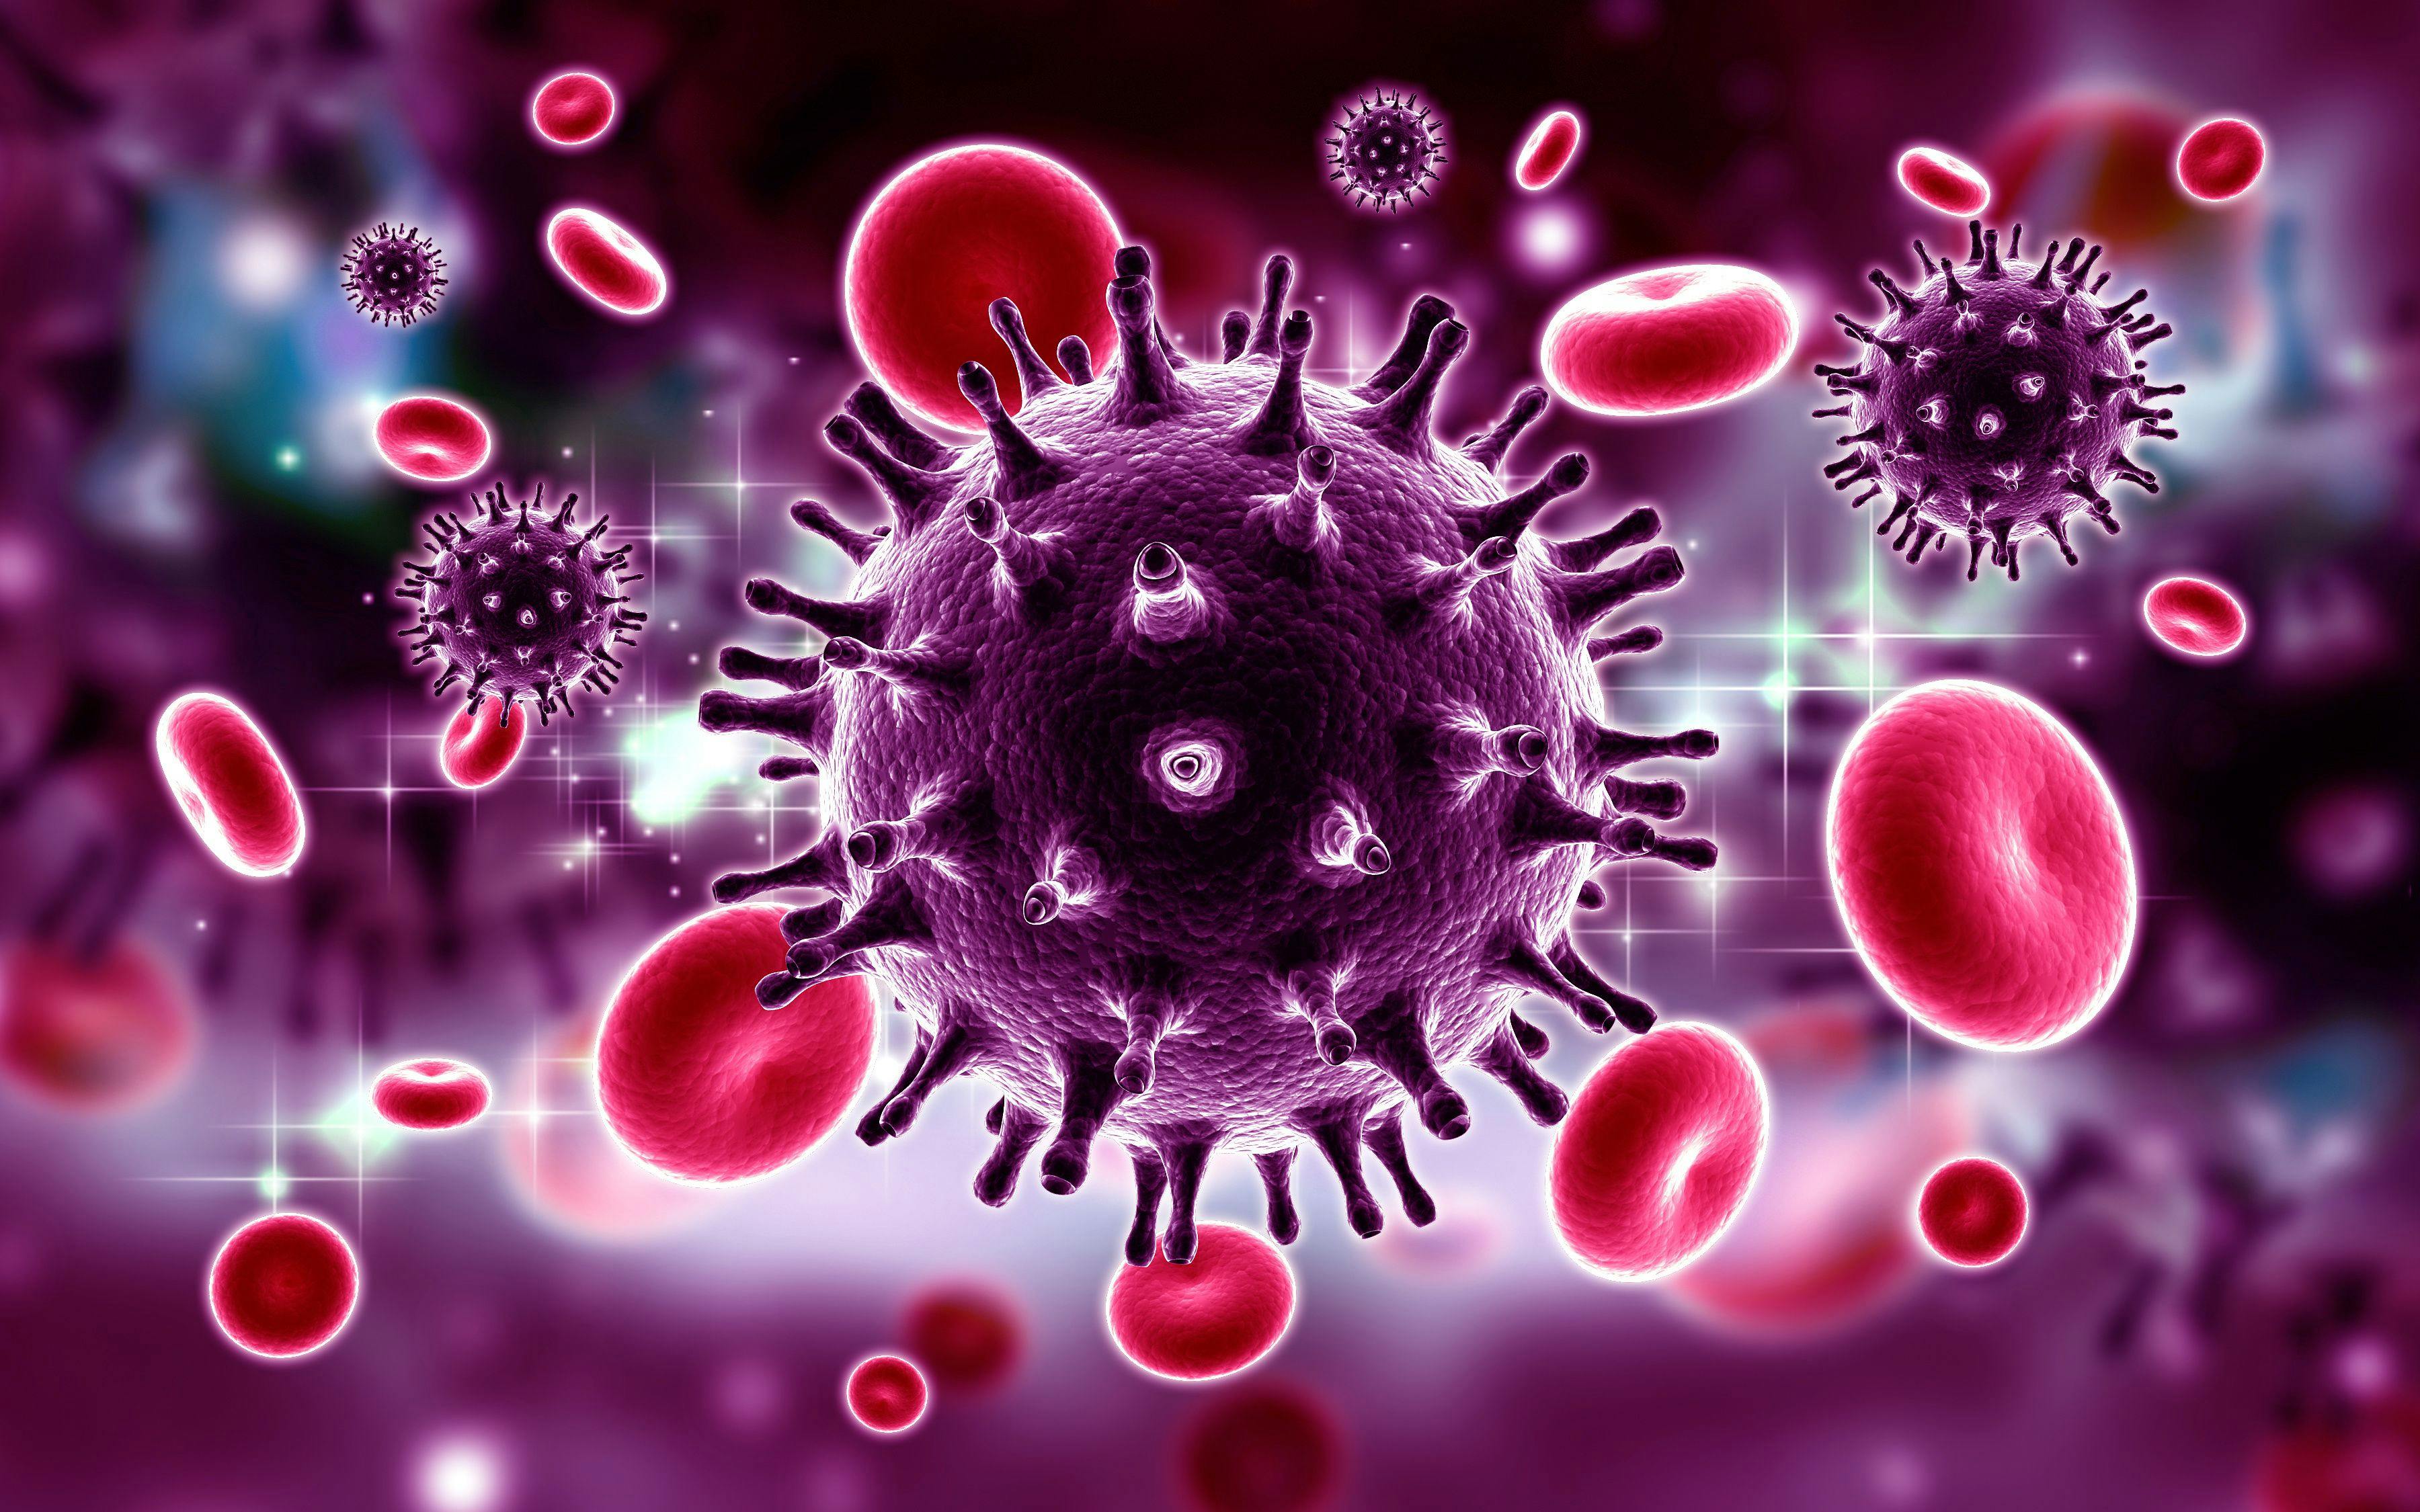 Biktarvy Demonstrates Consistent Efficacy in Real-World Setting for Patients With HIV